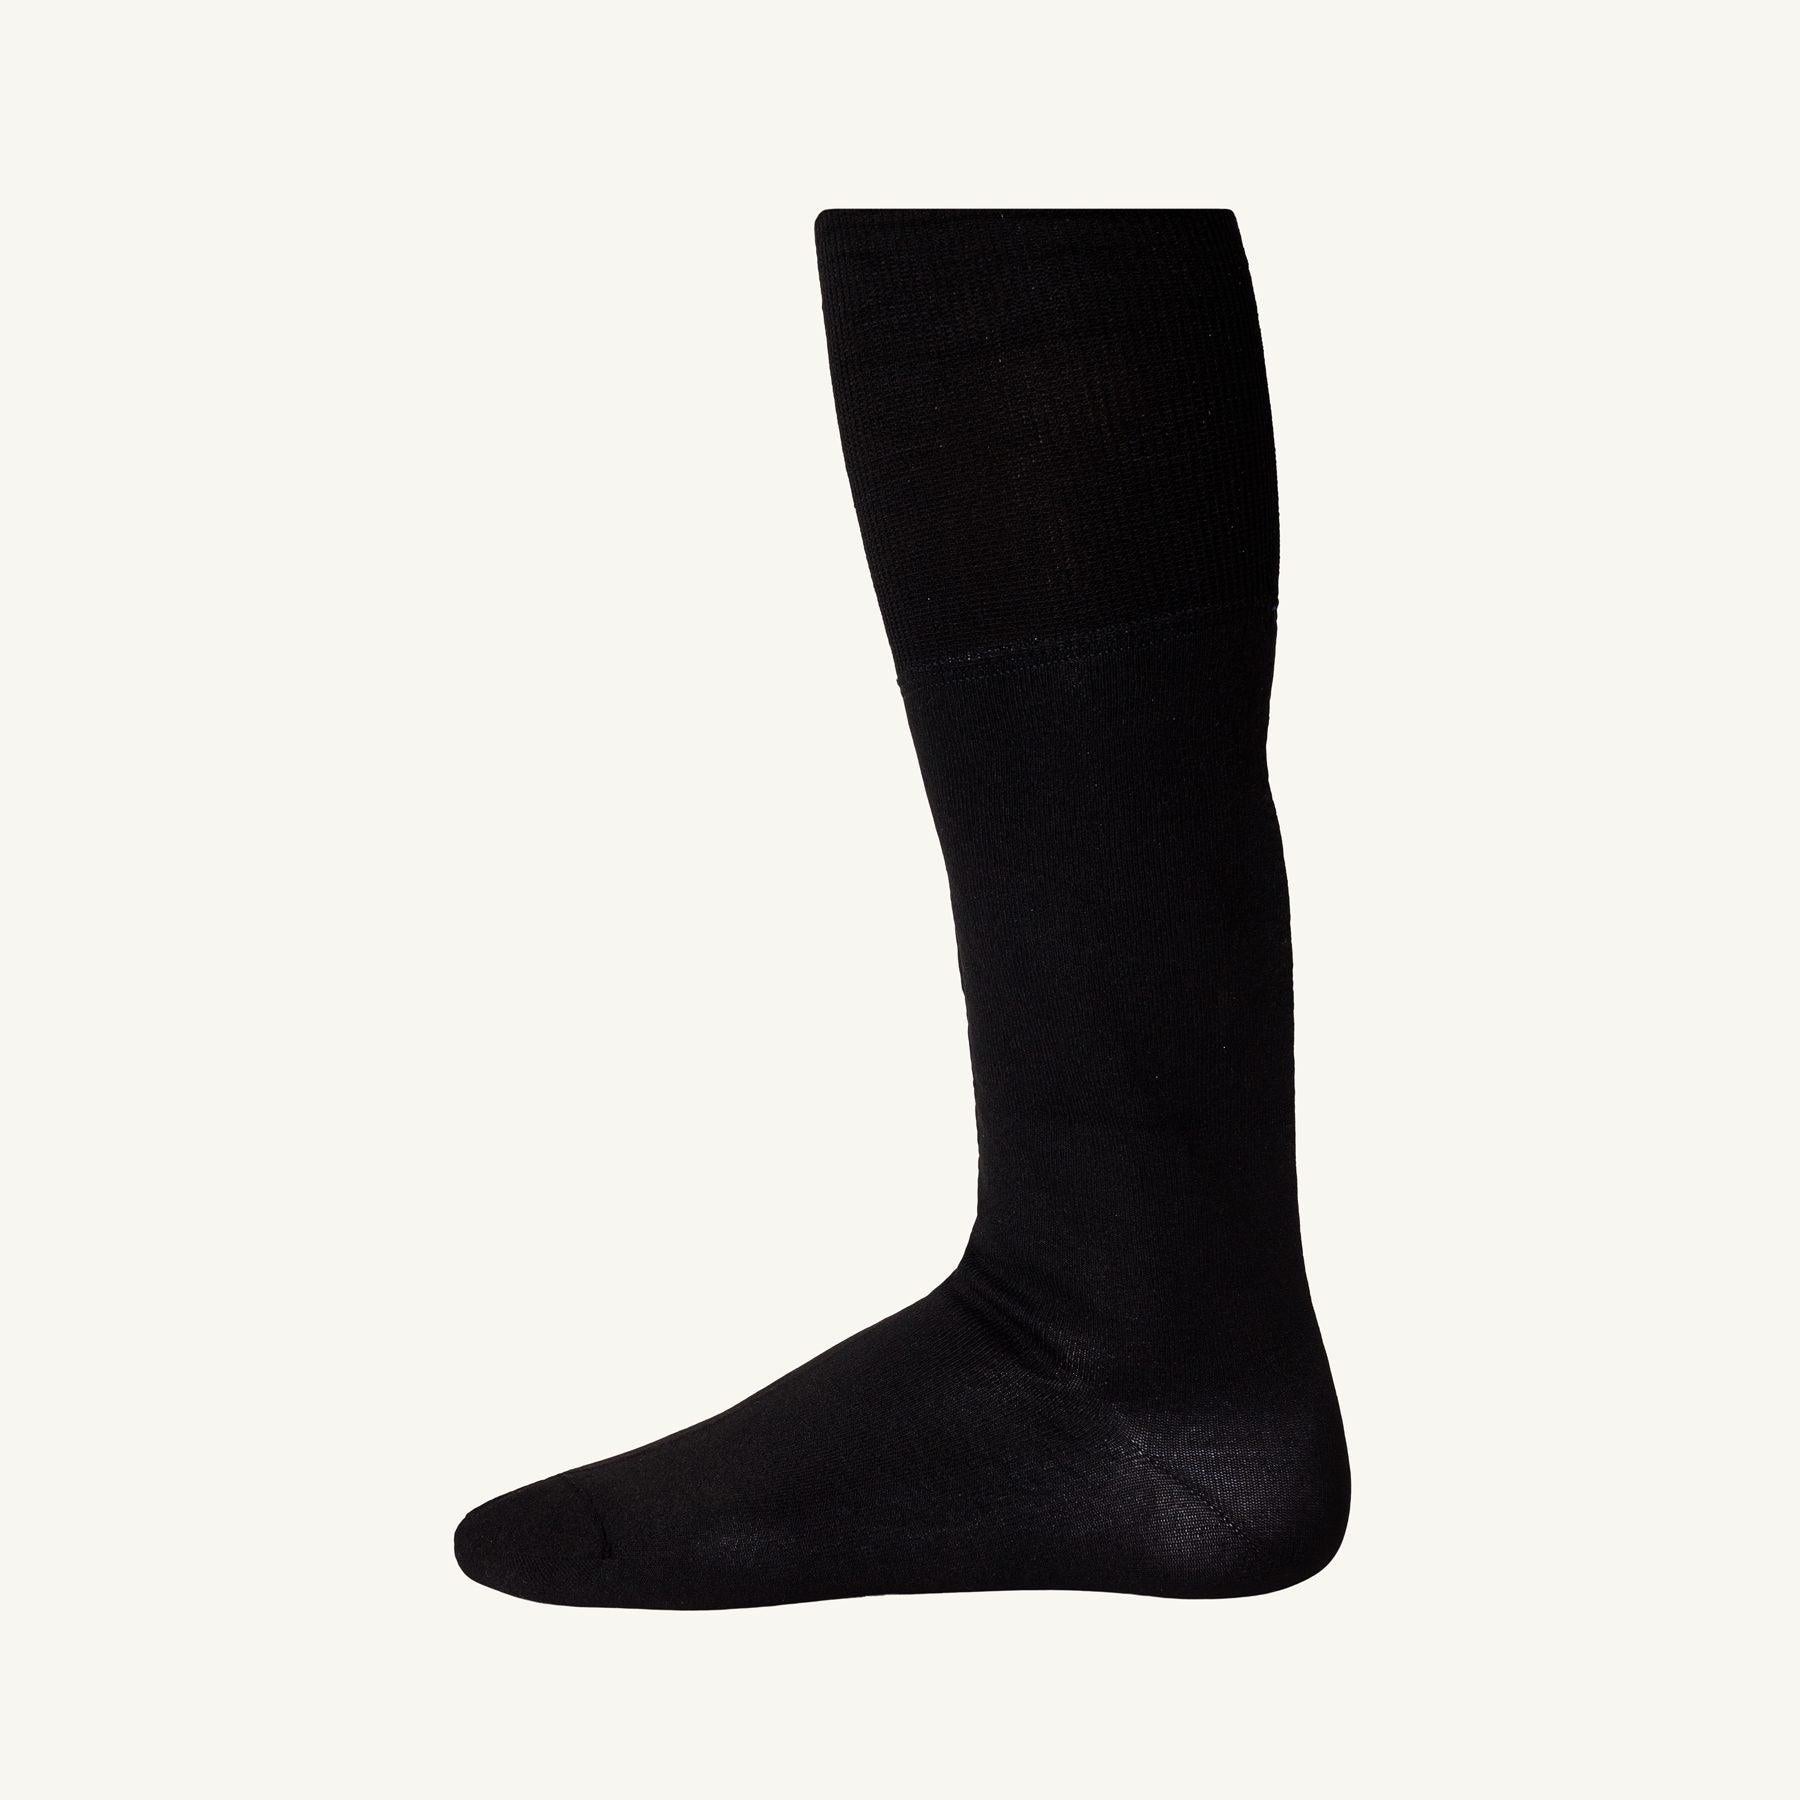 SUPERA™ Waterproof Sock with Breathable Membrane and Coolmax™ Liner - Trusted Gear Company LLC